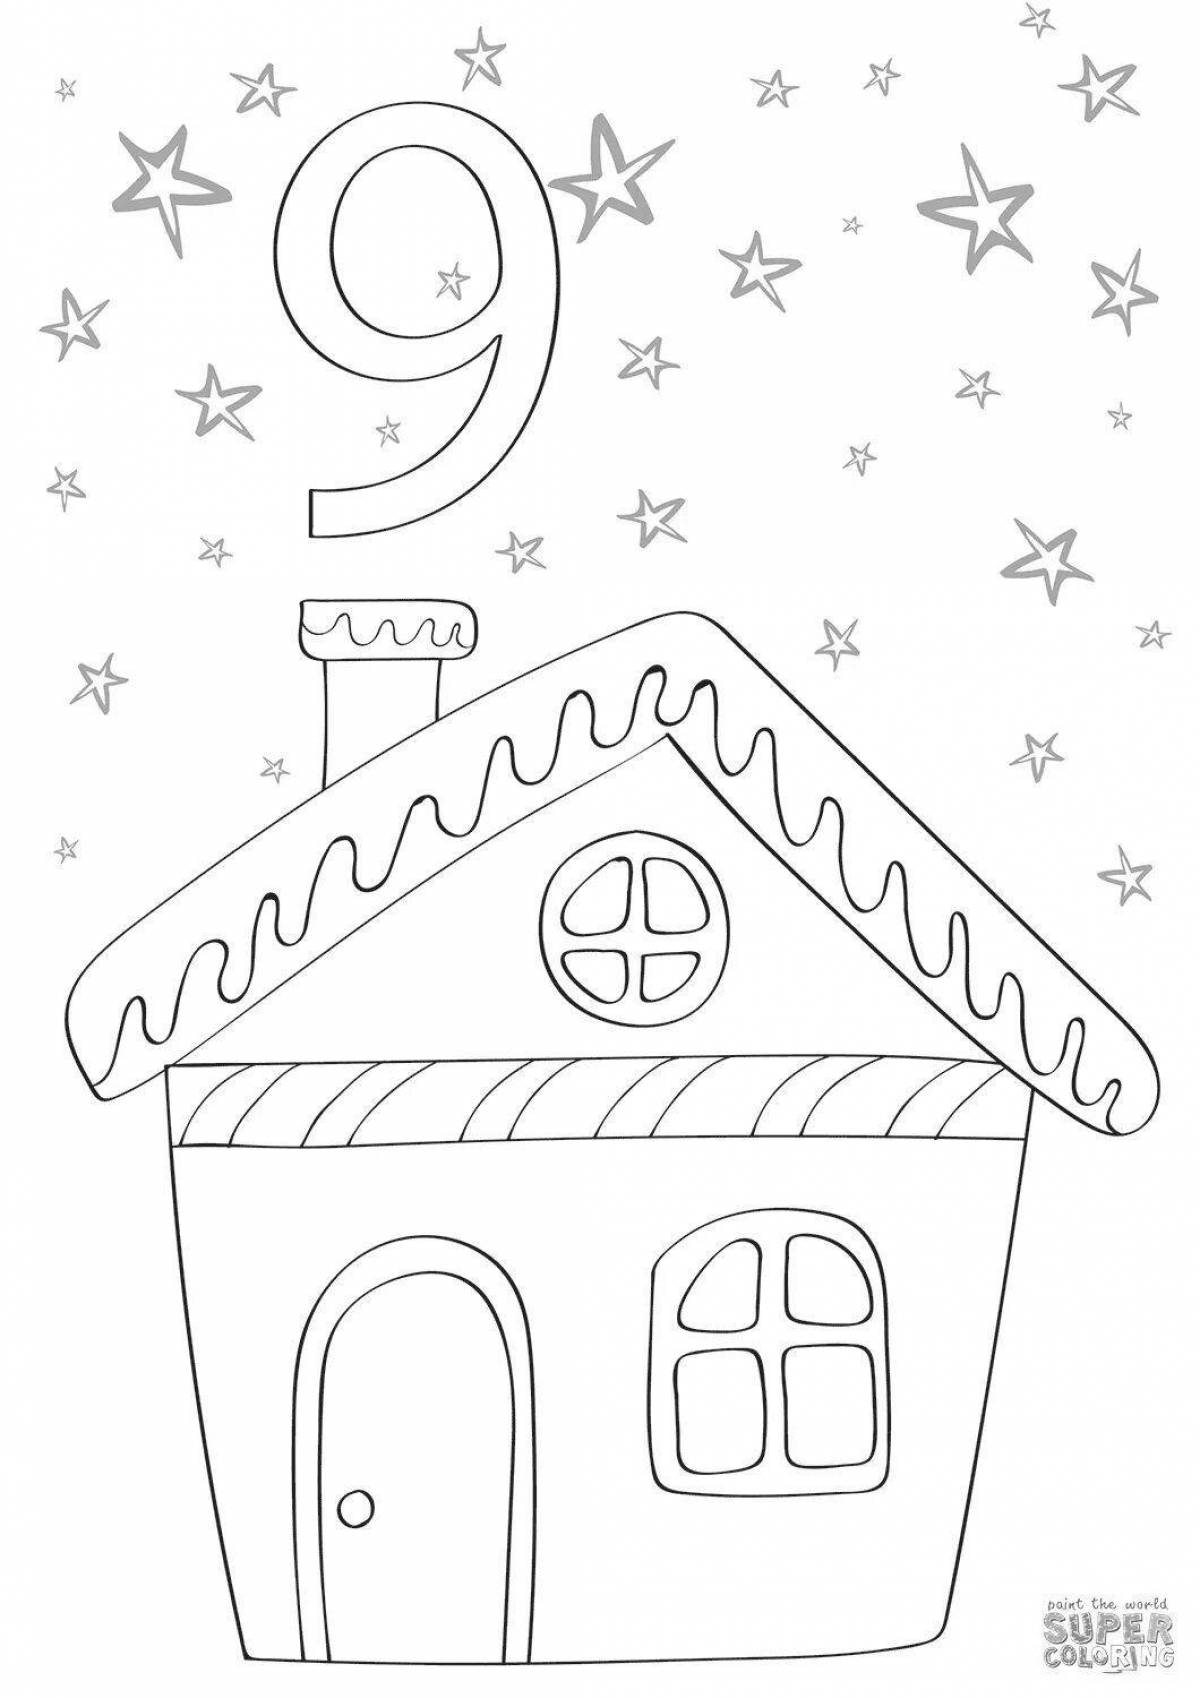 Bright winter house coloring book for kids